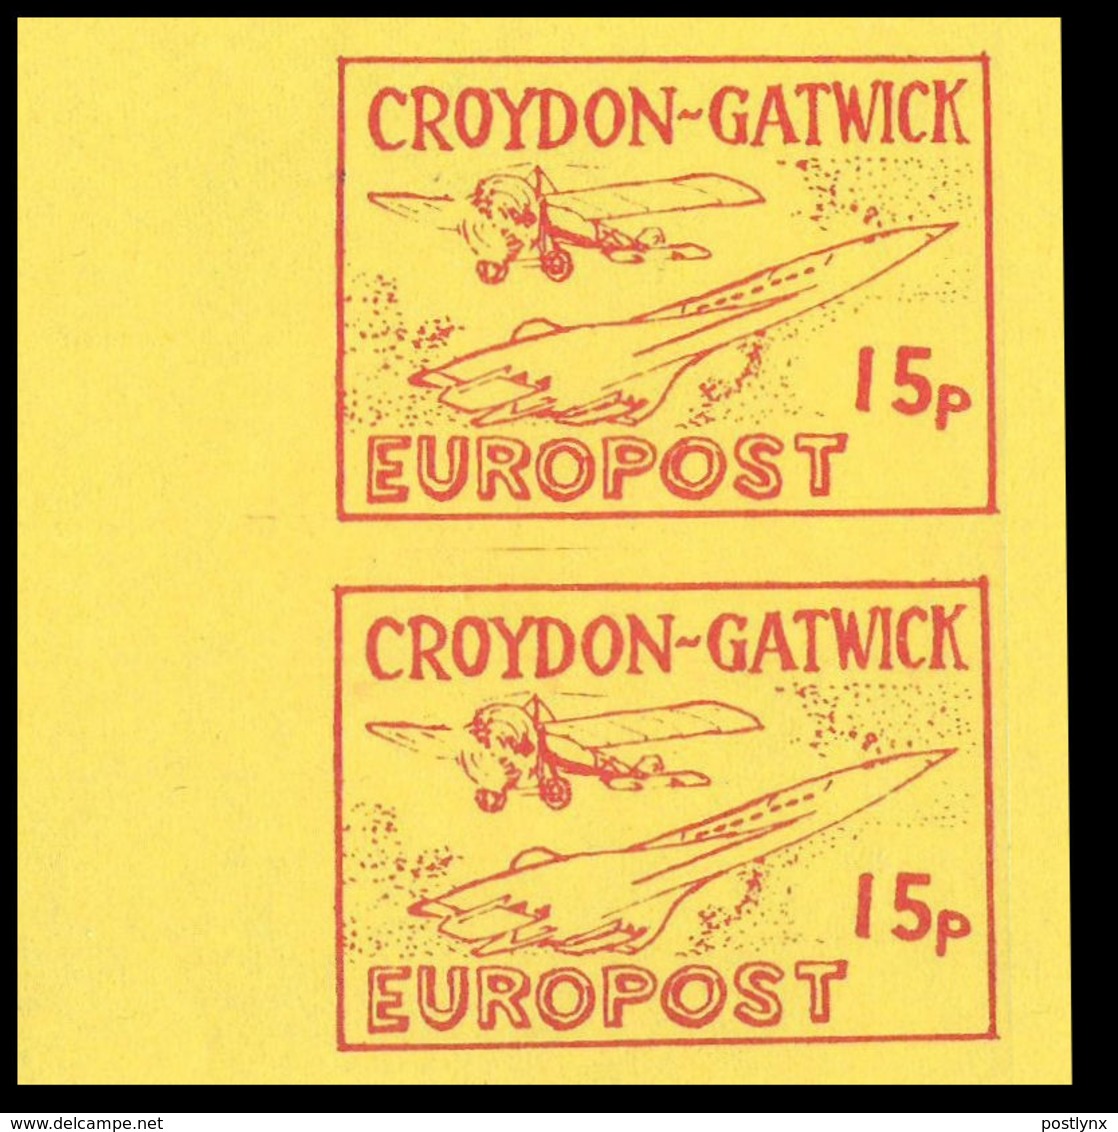 GREAT BRITAIN-Croydon Gatwick 1971 Aeroplane Concorde 15p #1 Large MARG.PAIR PROOF Yellow Paper - Prove & Ristampe